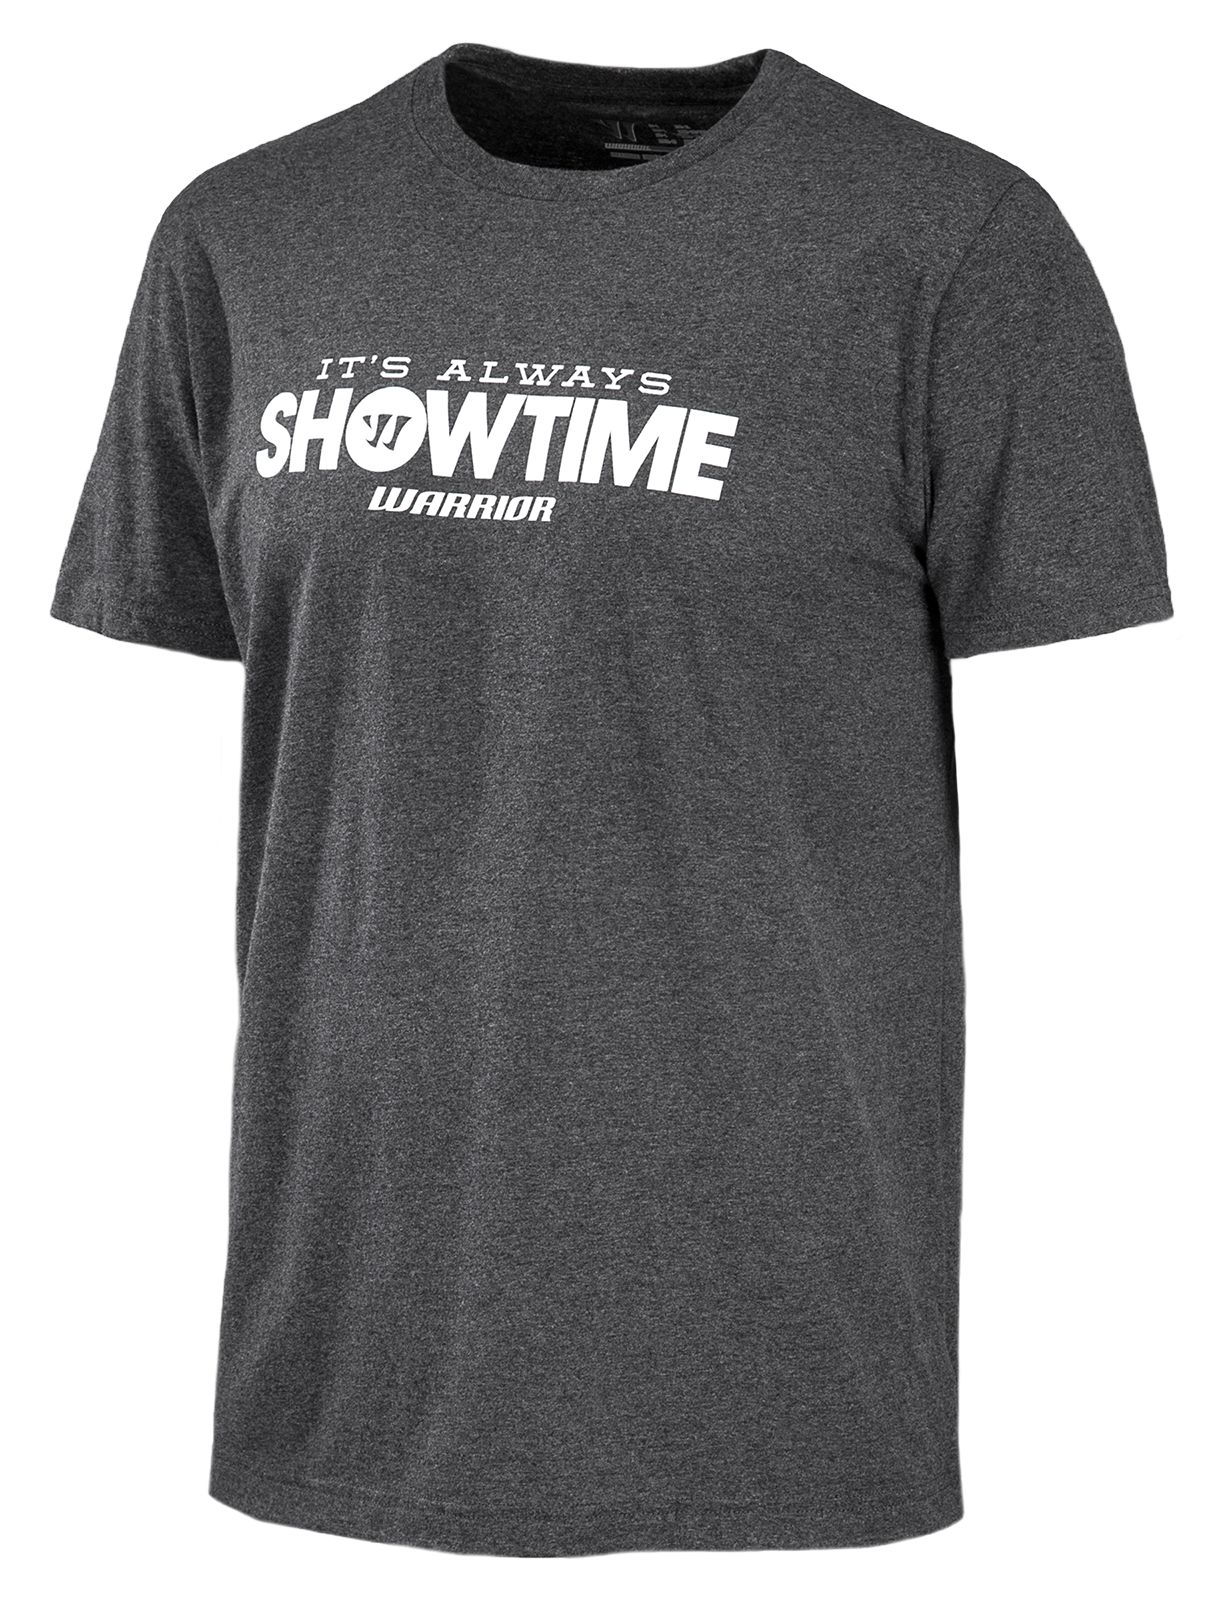 Showtime 50/50 Tee, Black Heather image number 1